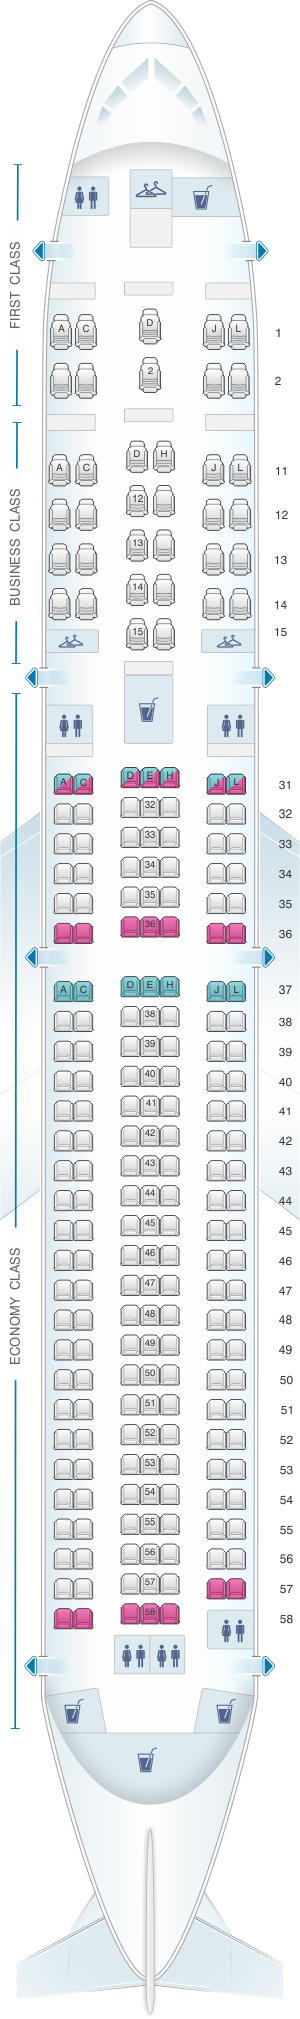 Seat map for Air China Boeing B767 300